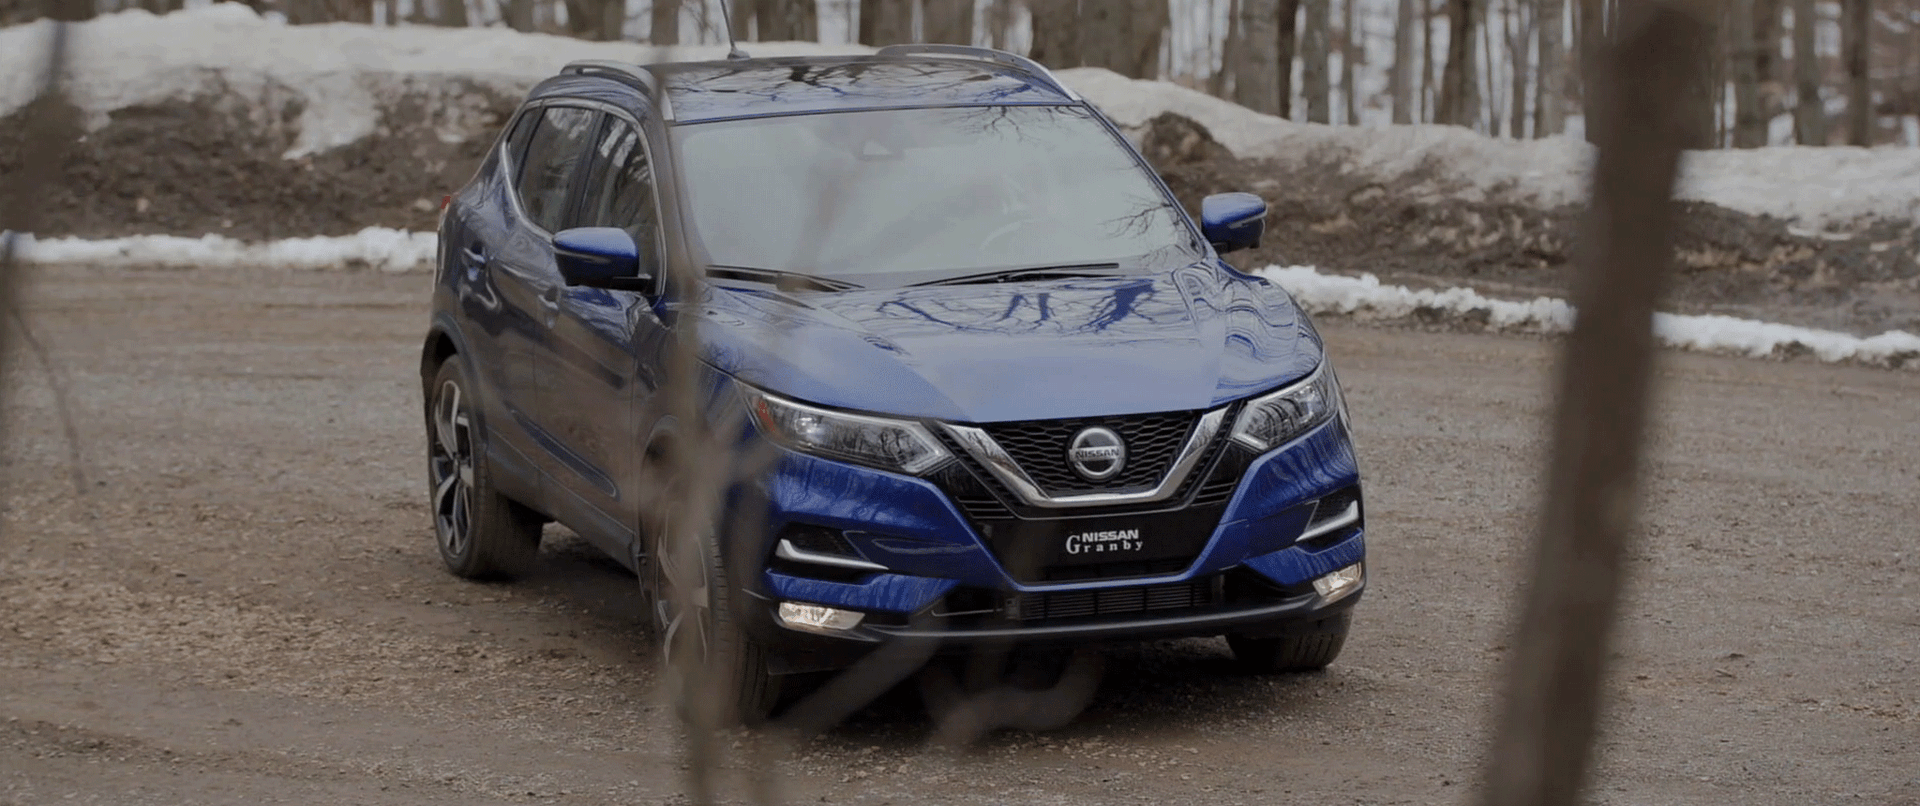 Groupe beaucage article nissan qashqai 2020 21 